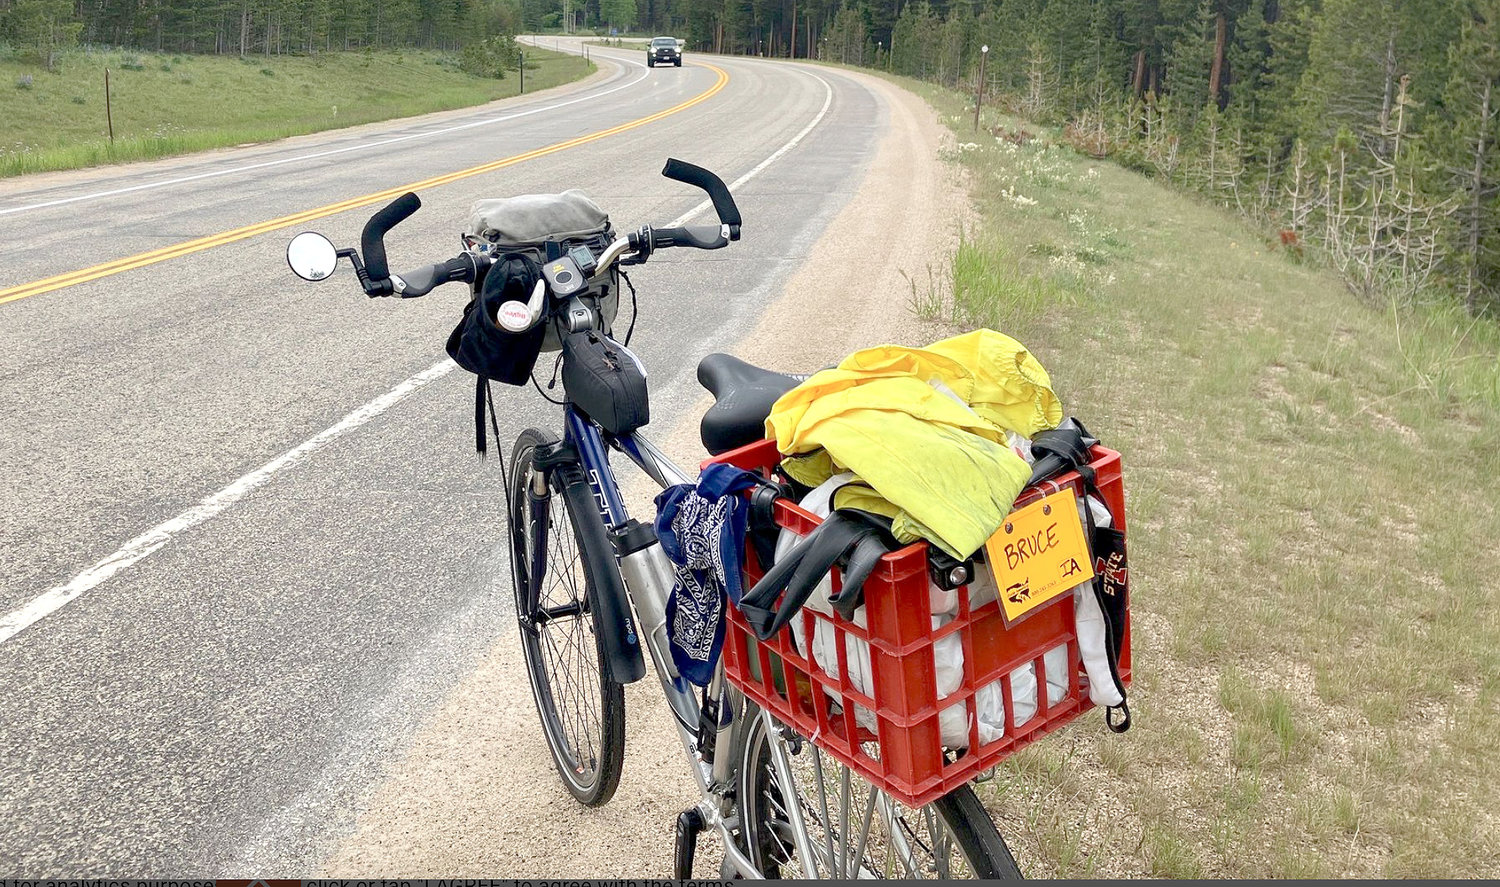 Huddleson's bike sits on the roadside along a mountain pass in Wyoming.